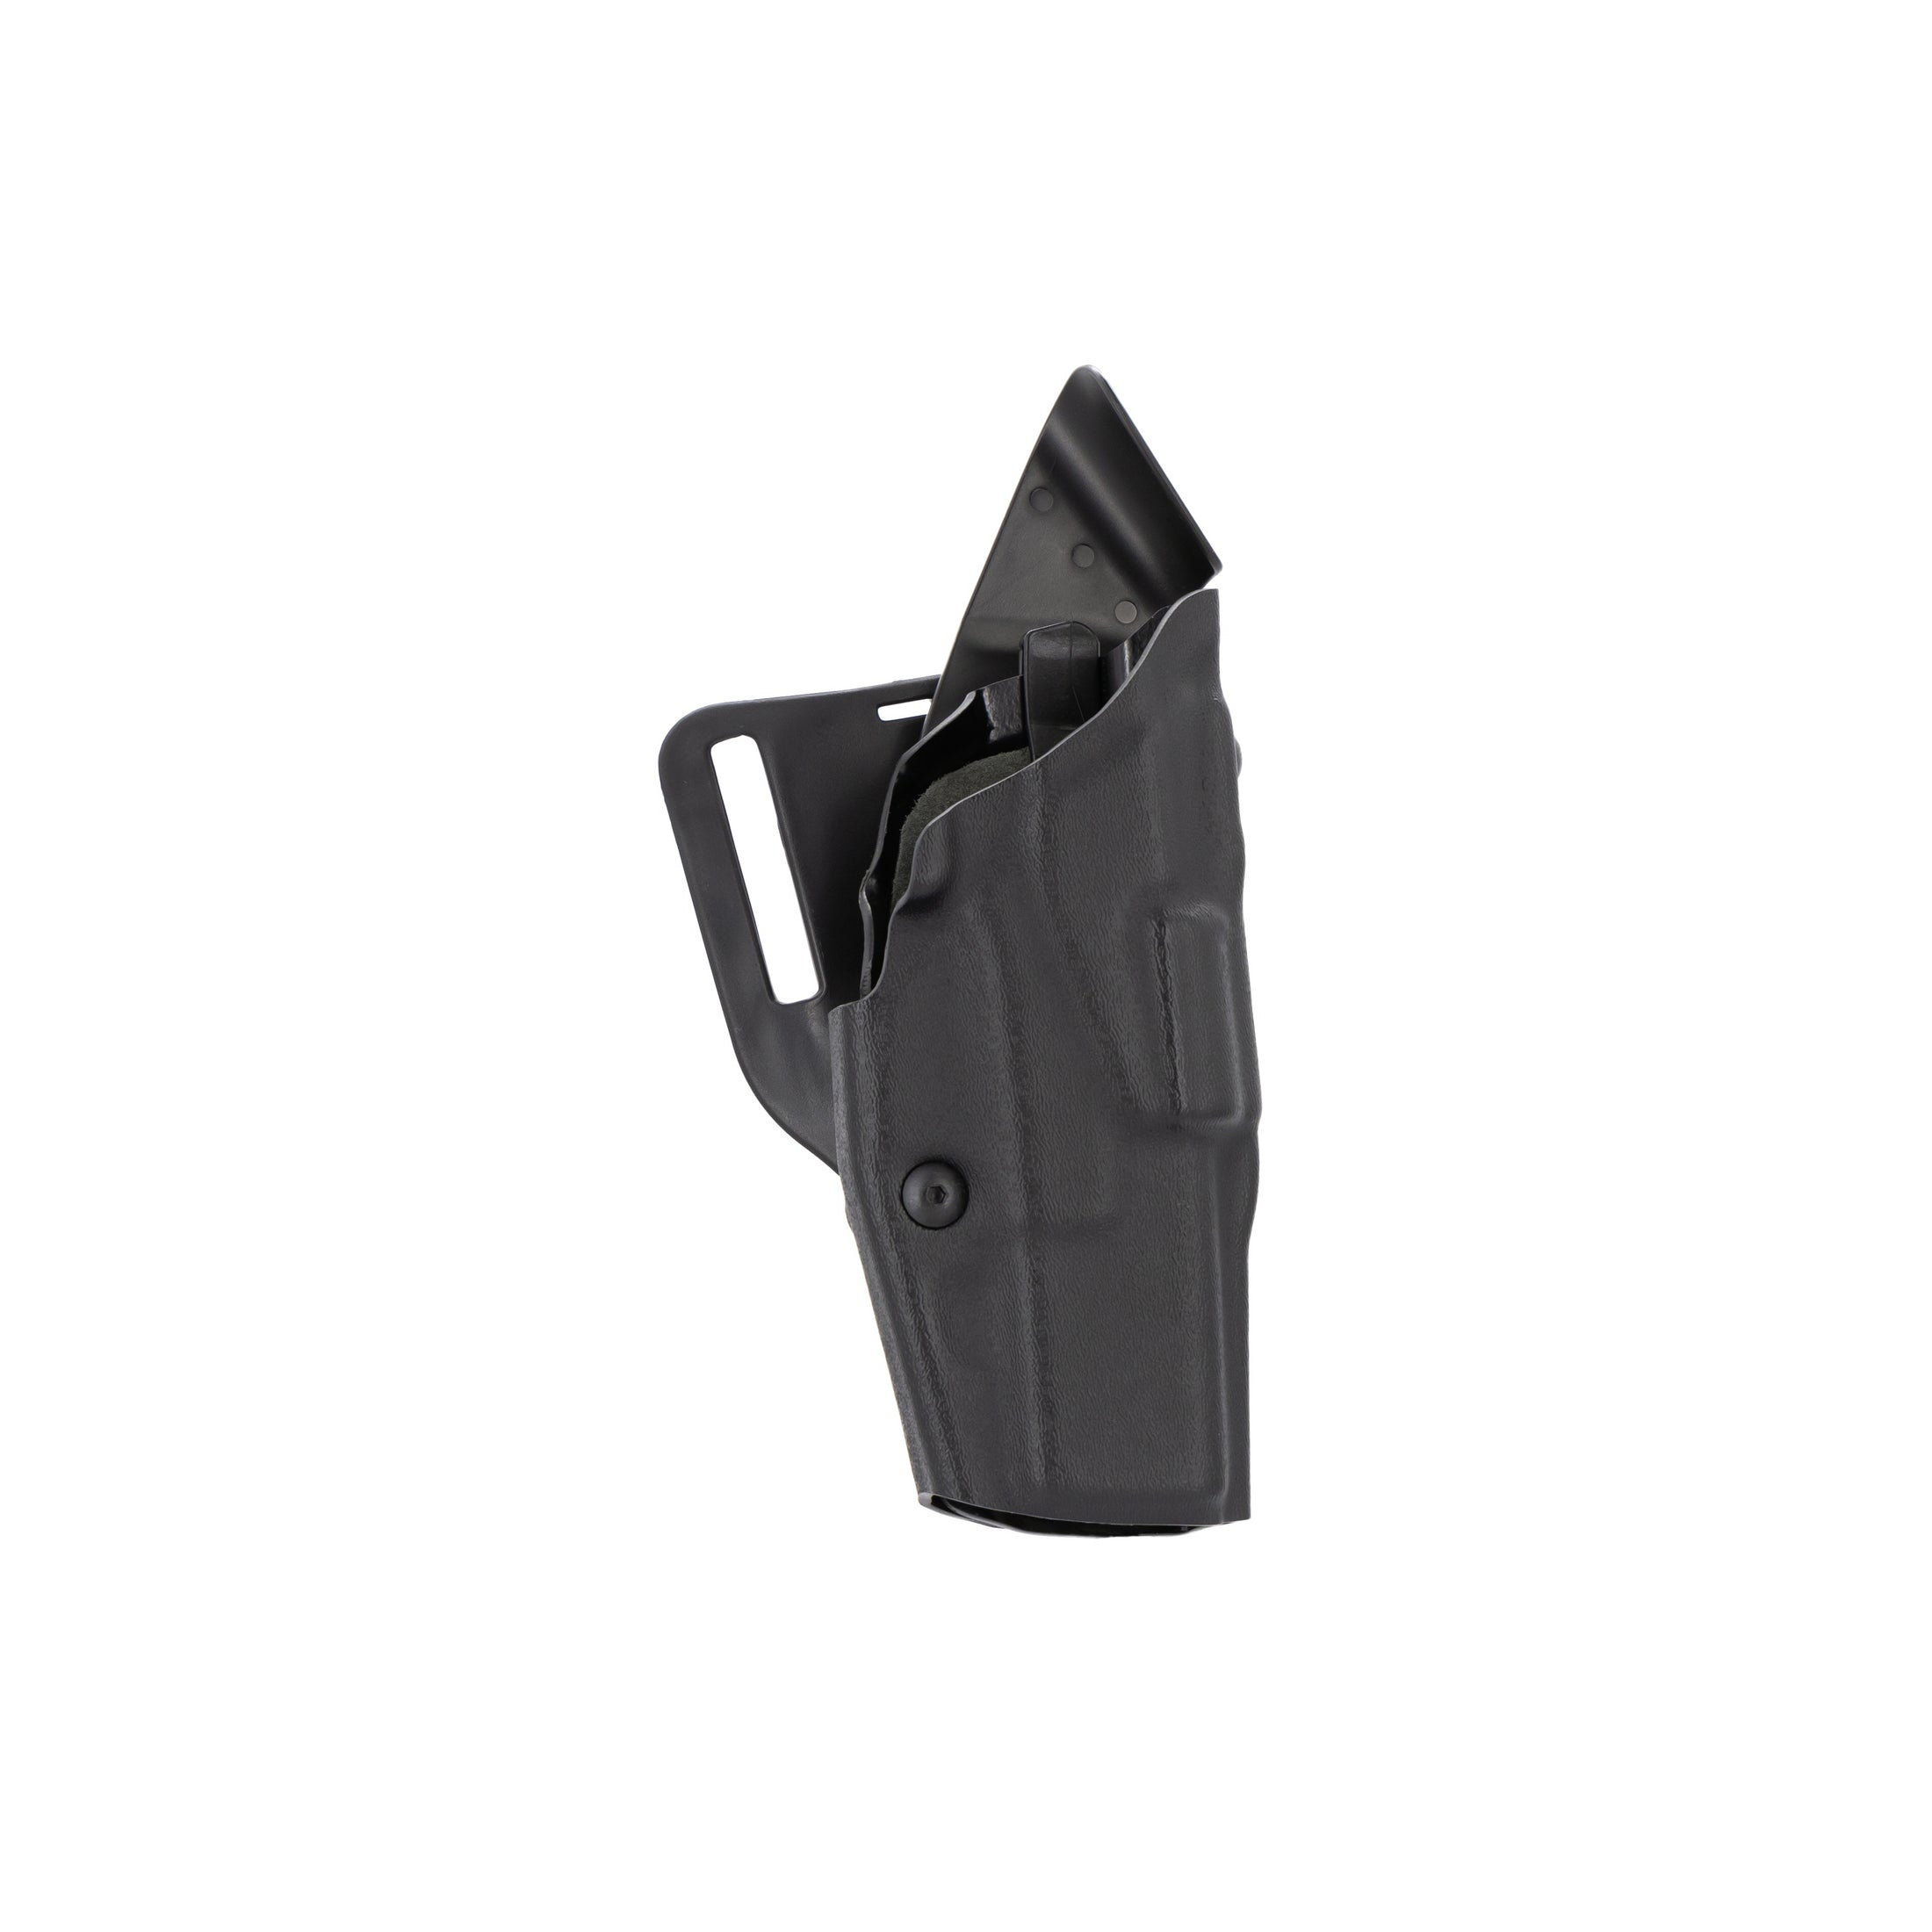 Safariland Model 6360RDS ALS/SLS Mid-Ride Level III Retention Duty Holster for Glock 19 w/ Compact Light STX Plain 6360RDS-28327-411